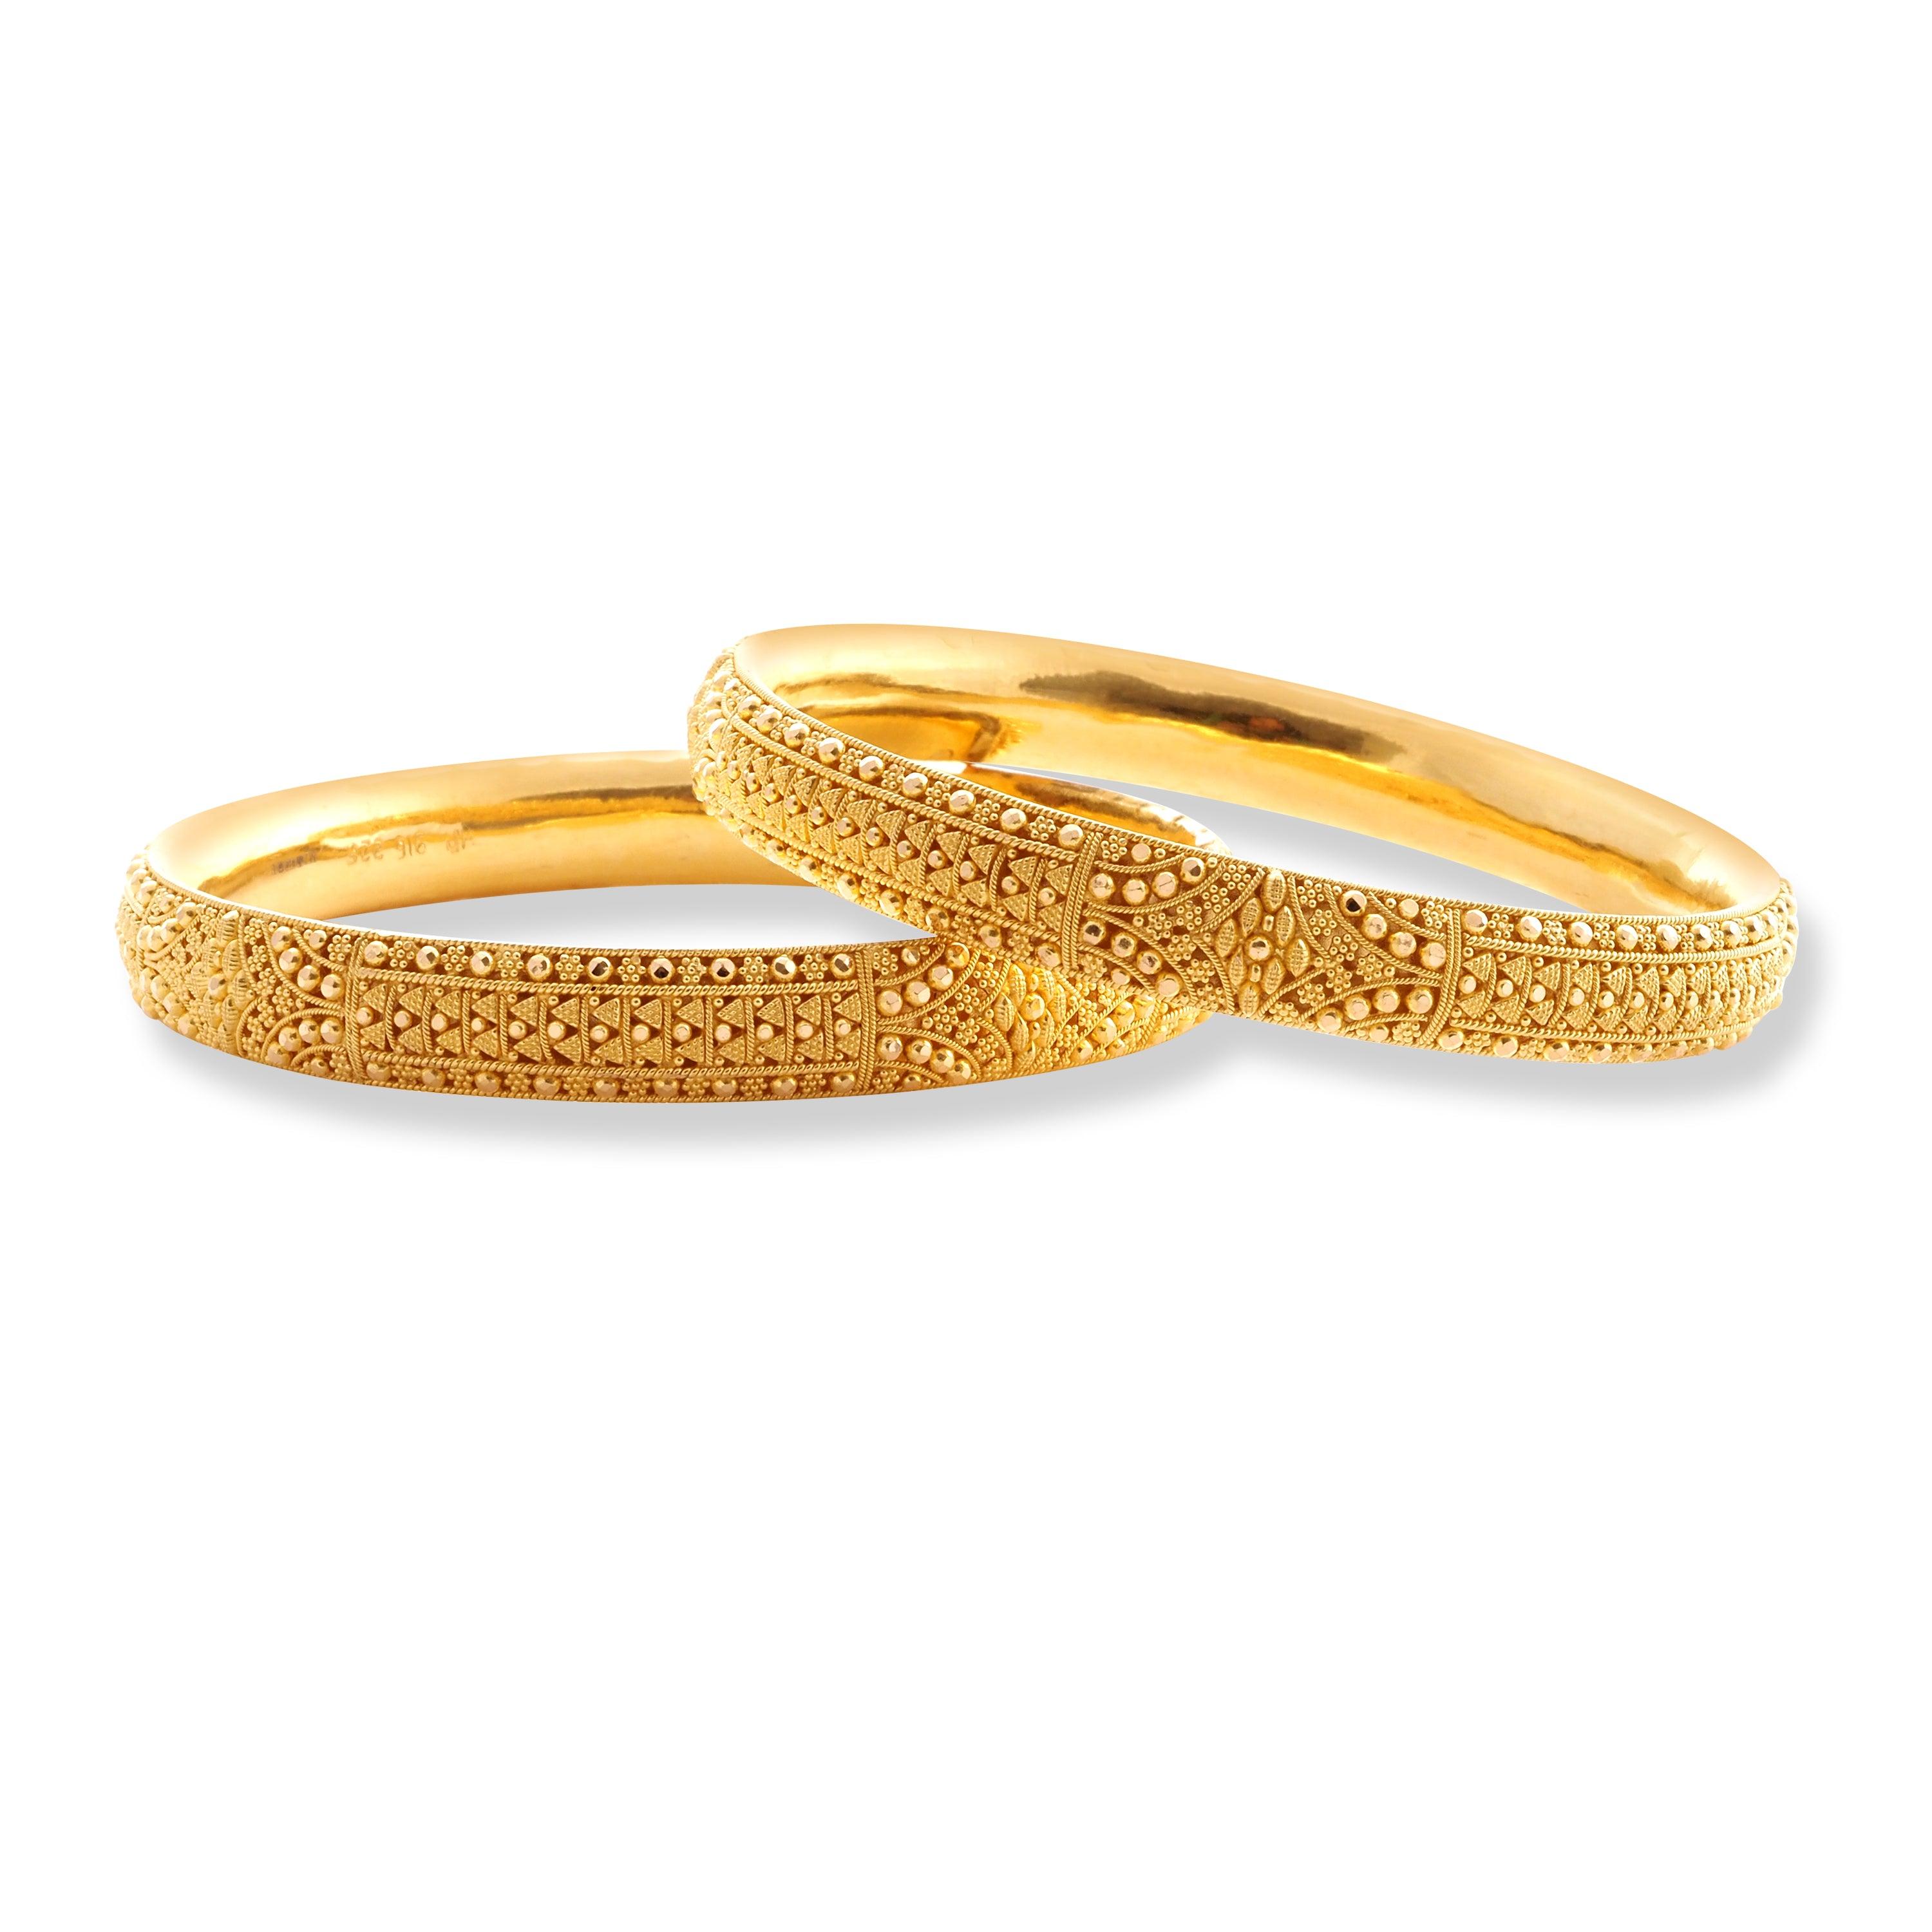 22ct Gold Pair of Bangles with Filigree Work & Comfort fit Finish B-8582 - Minar Jewellers